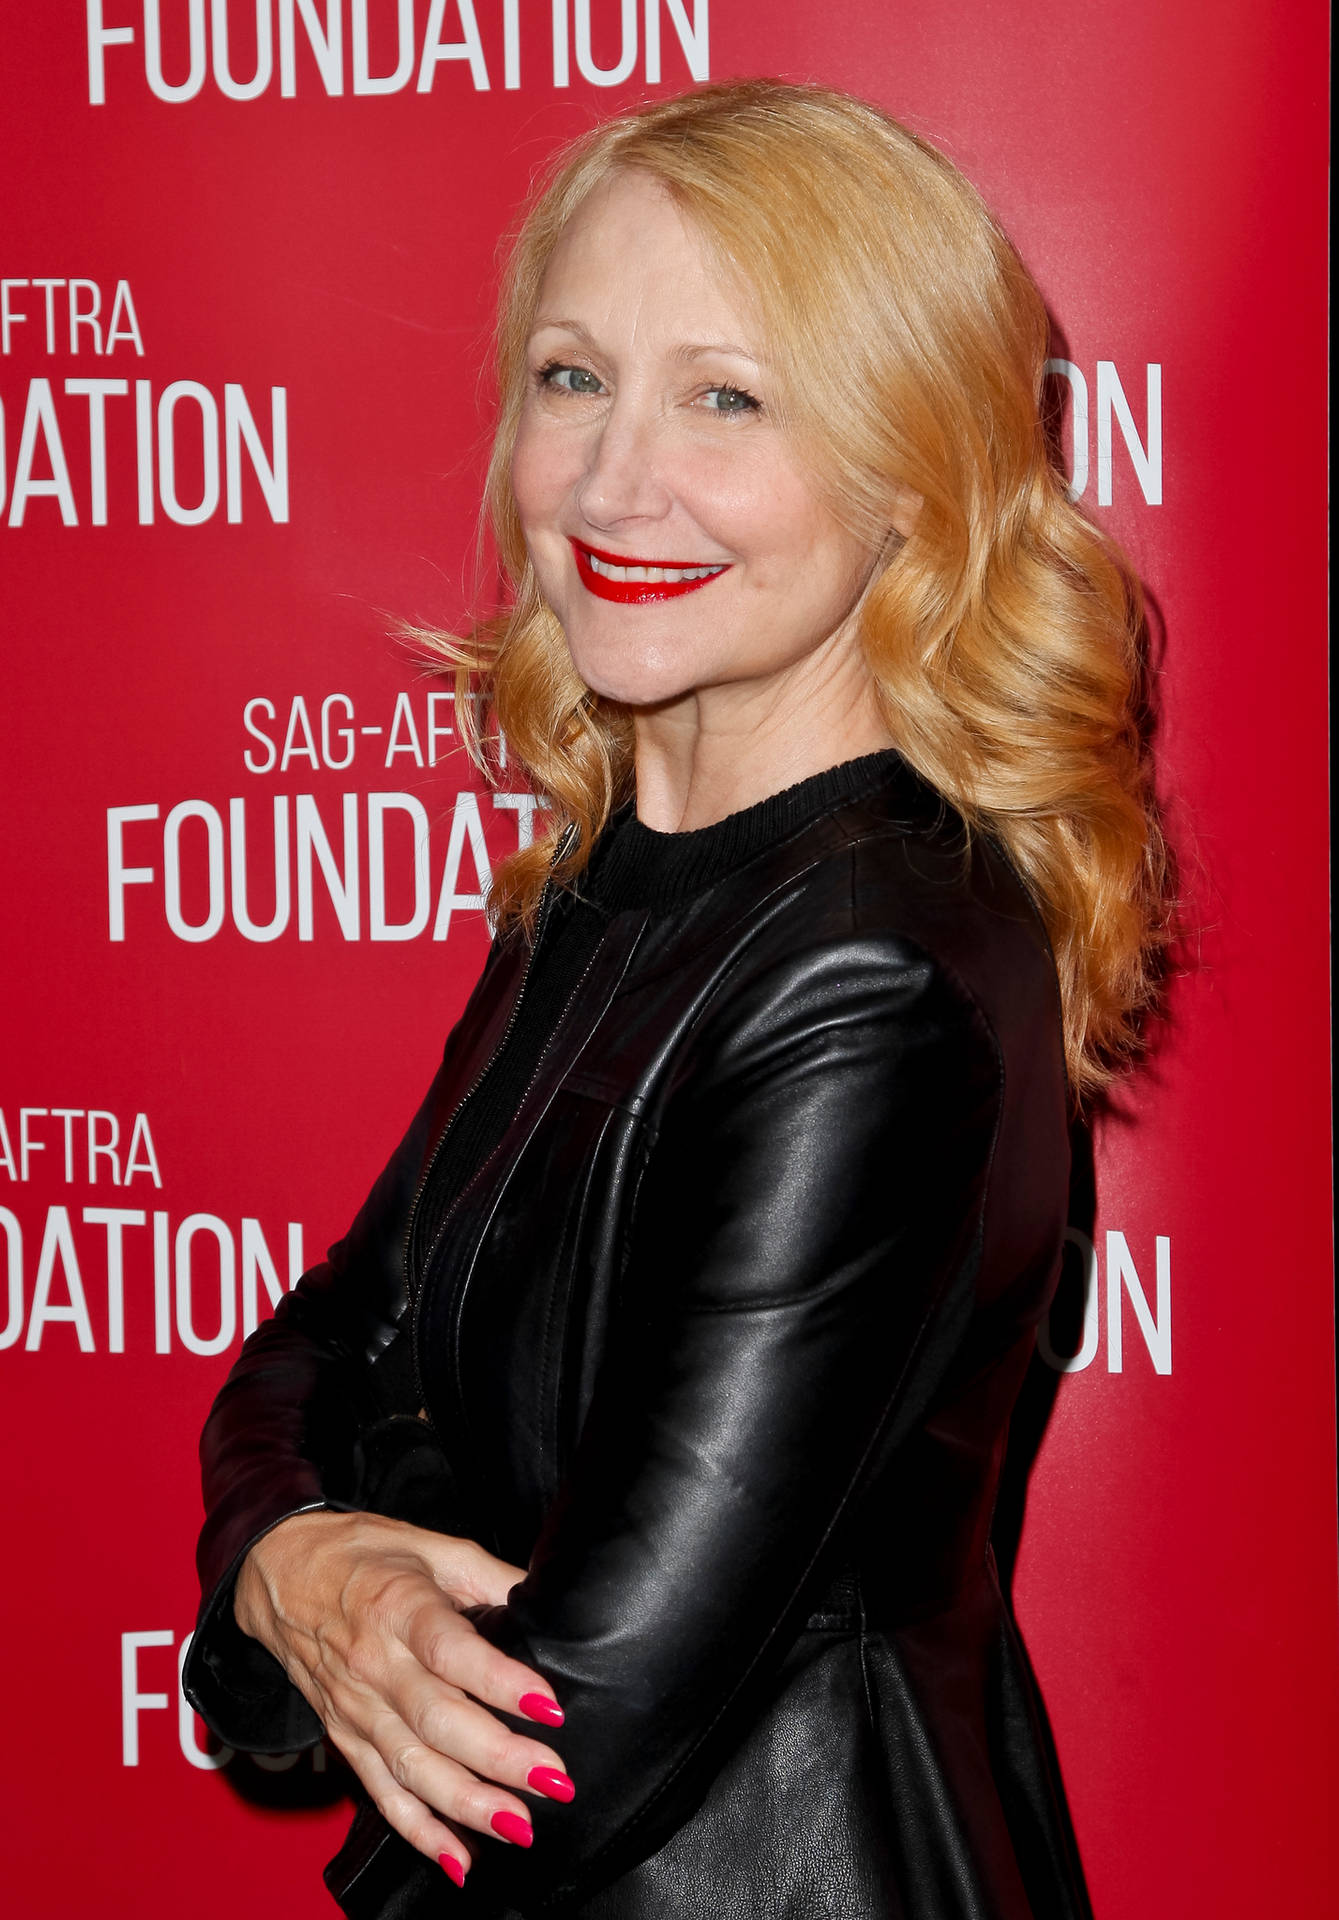 Patricia Clarkson At The SAG-AFTRA Event Wallpaper